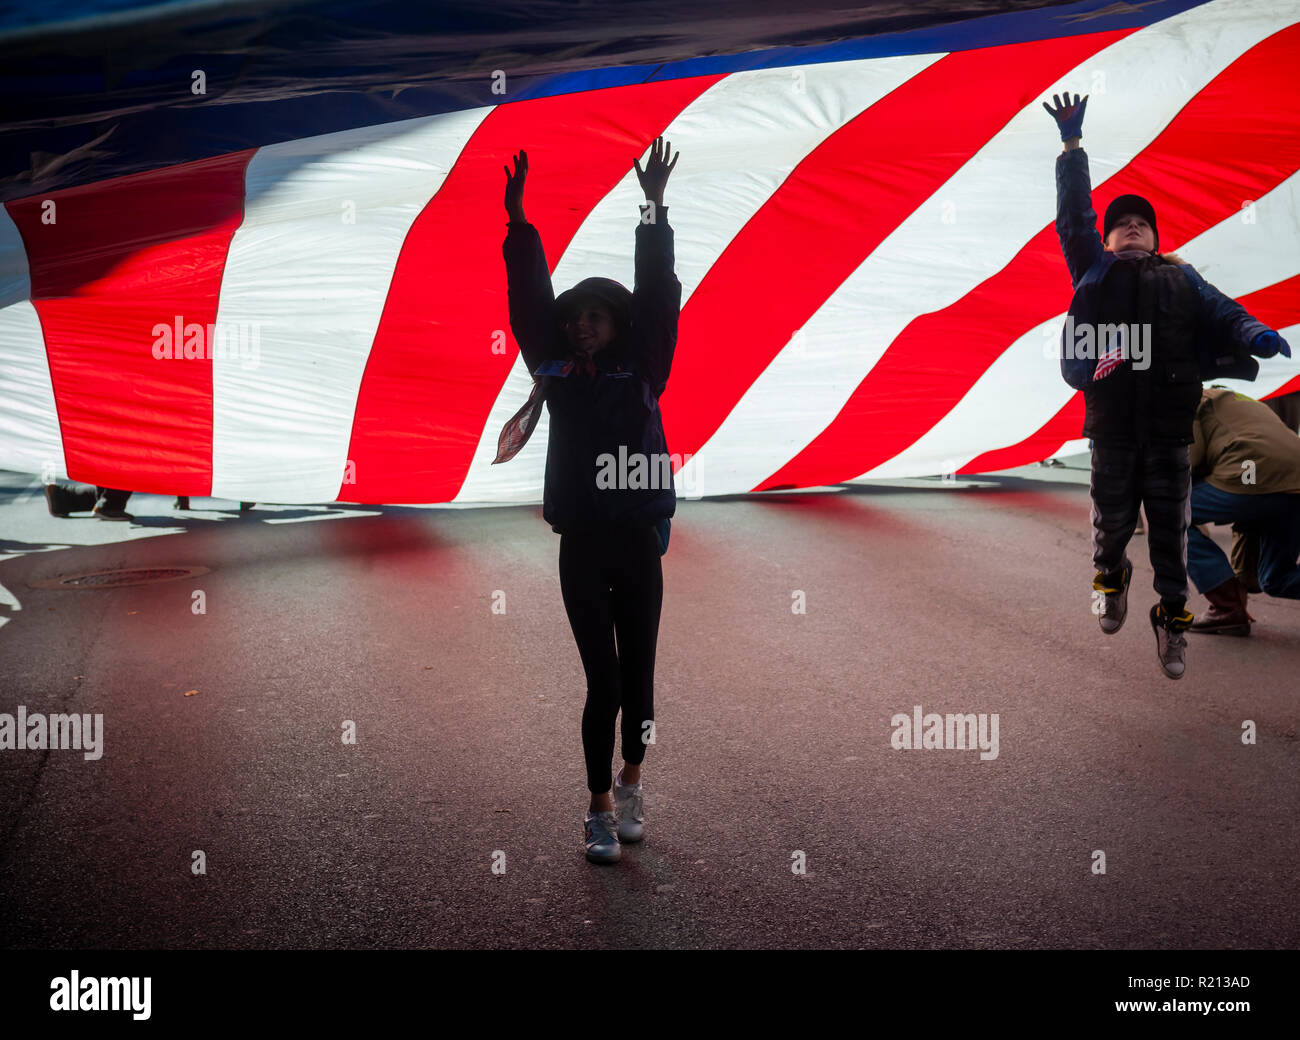 A giant American flag is carried on Fifth Avenue in New York during the Veterans Day Parade on Sunday, November 11, 2018.  Originally knows as Armistice Day, this year the holiday commemorates the 100th anniversary of the end of World War I. On the eleventh hour of the eleventh day of the eleventh month the guns fell silent in 1918 marking the end of World War I.  The holiday has been expanded to include all American soldiers from all wars. (© Richard B. Levine) Stock Photo